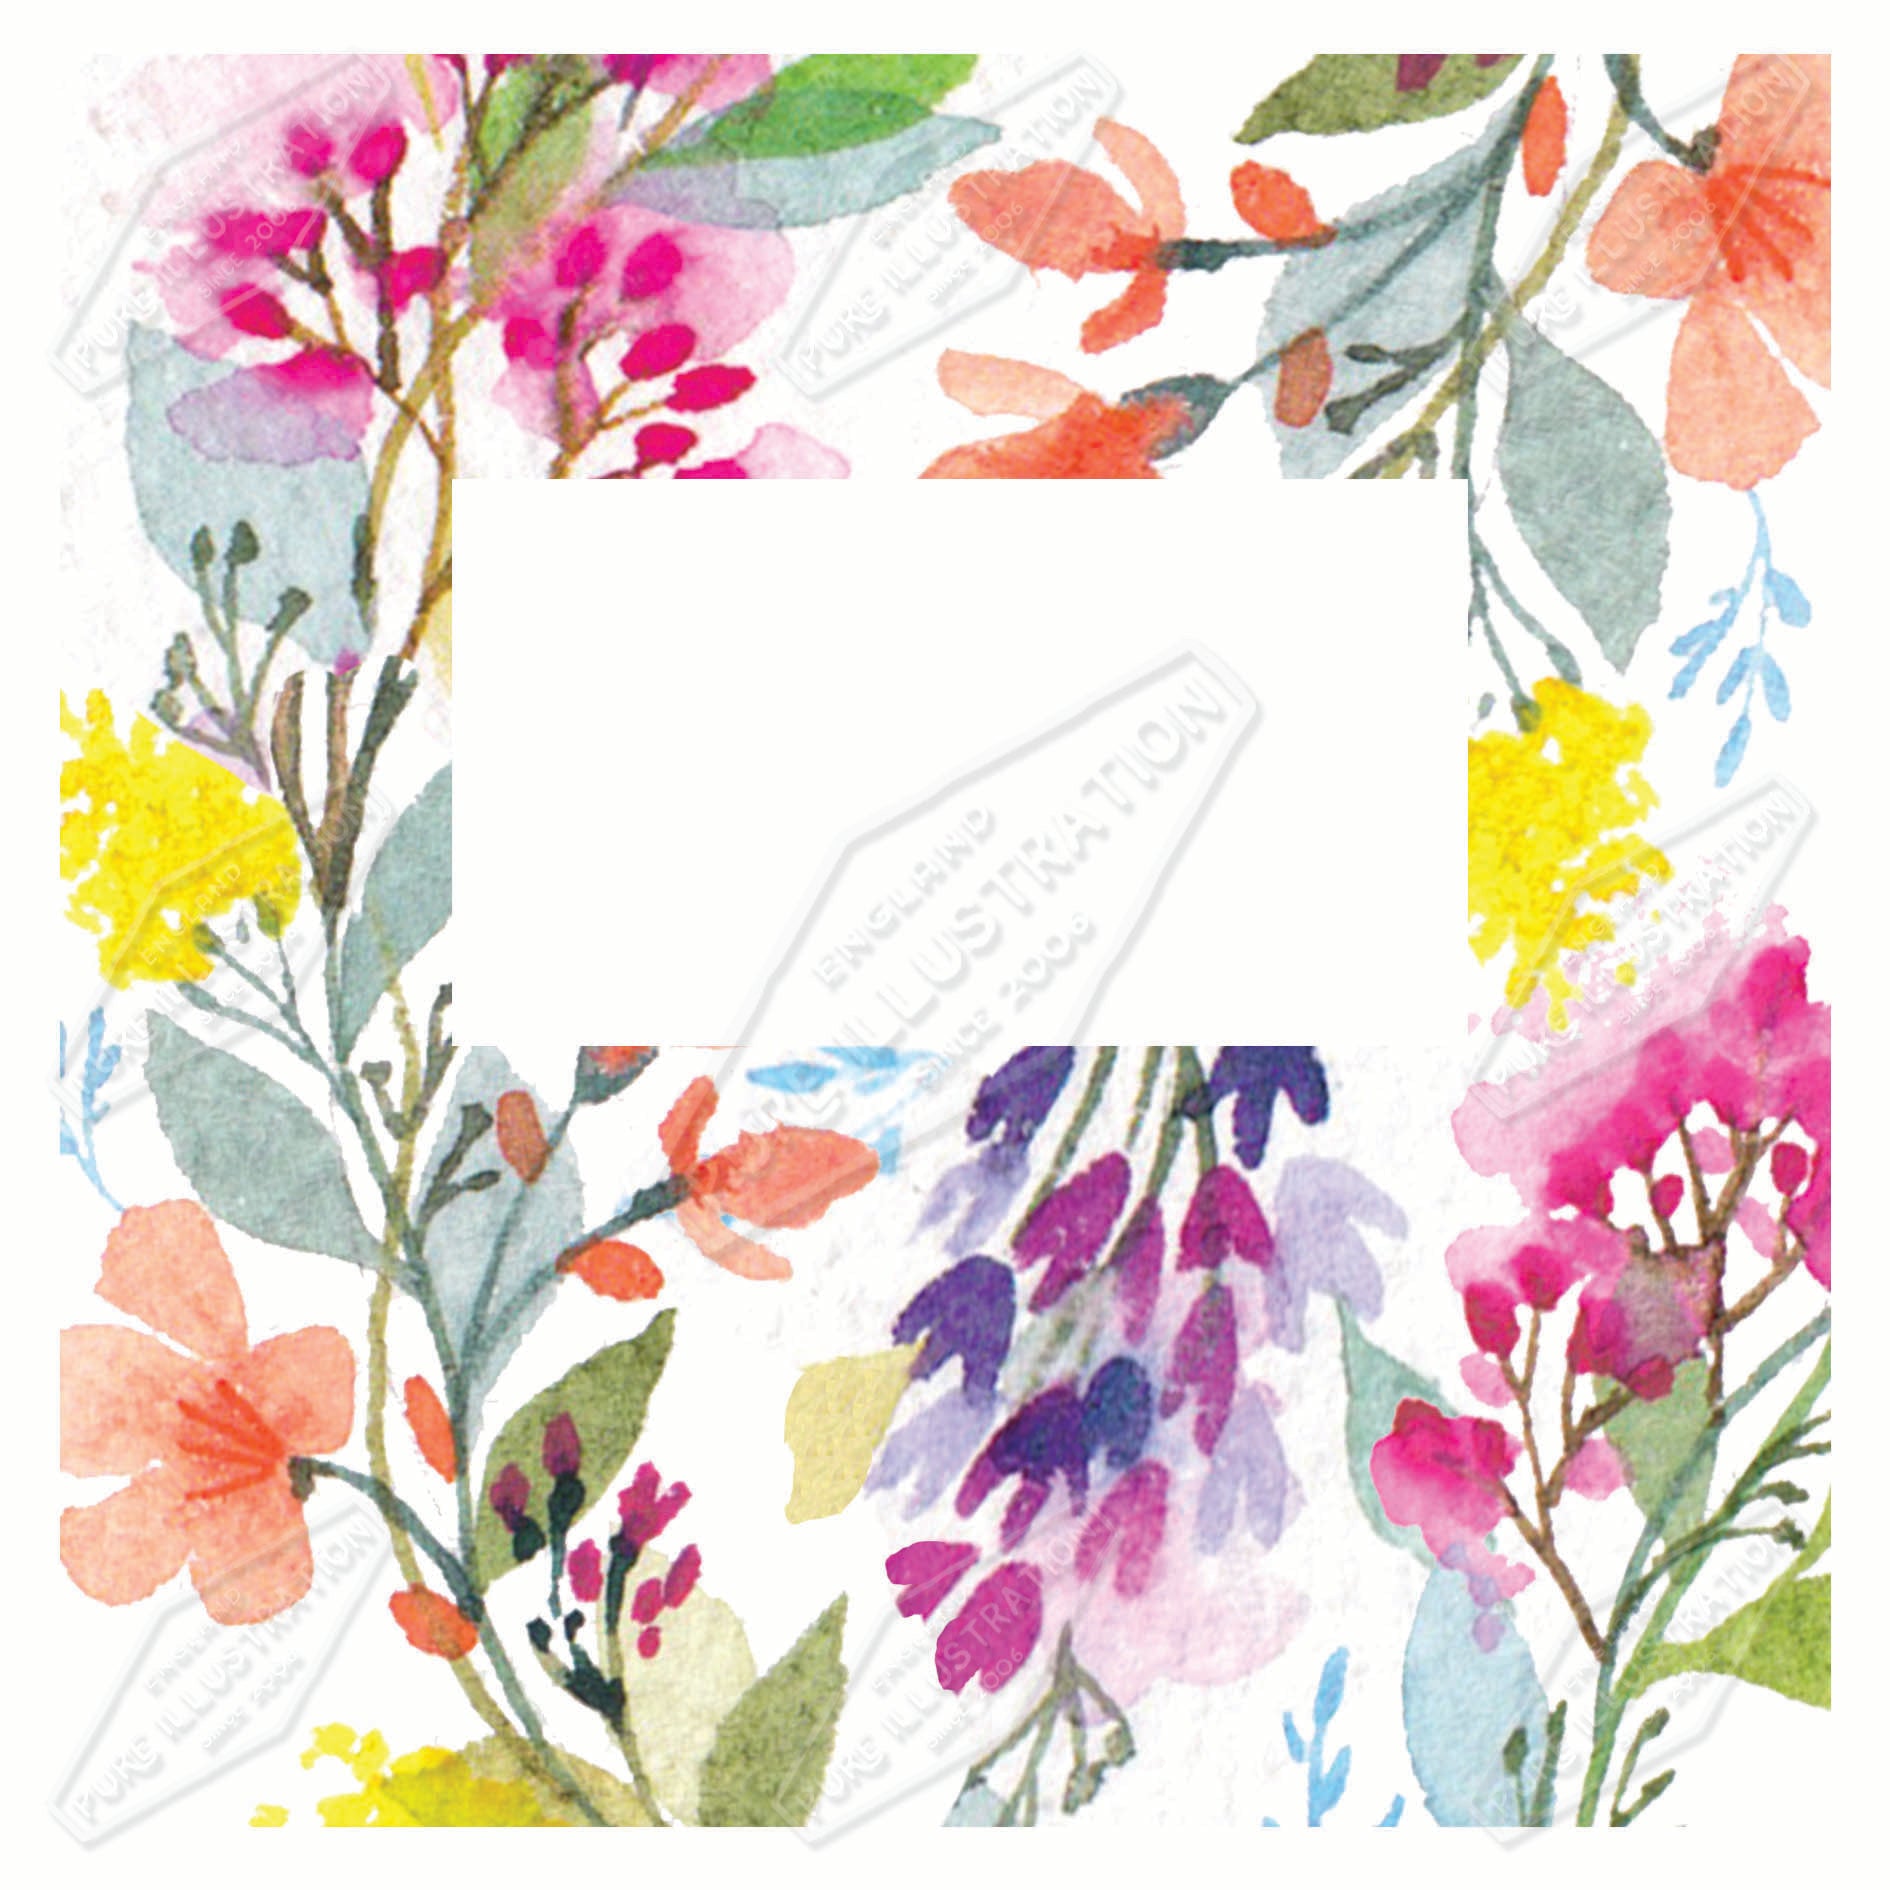 00035783AMA - Ally Marie is represented by Pure Art Licensing Agency - Everyday Greeting Card Design